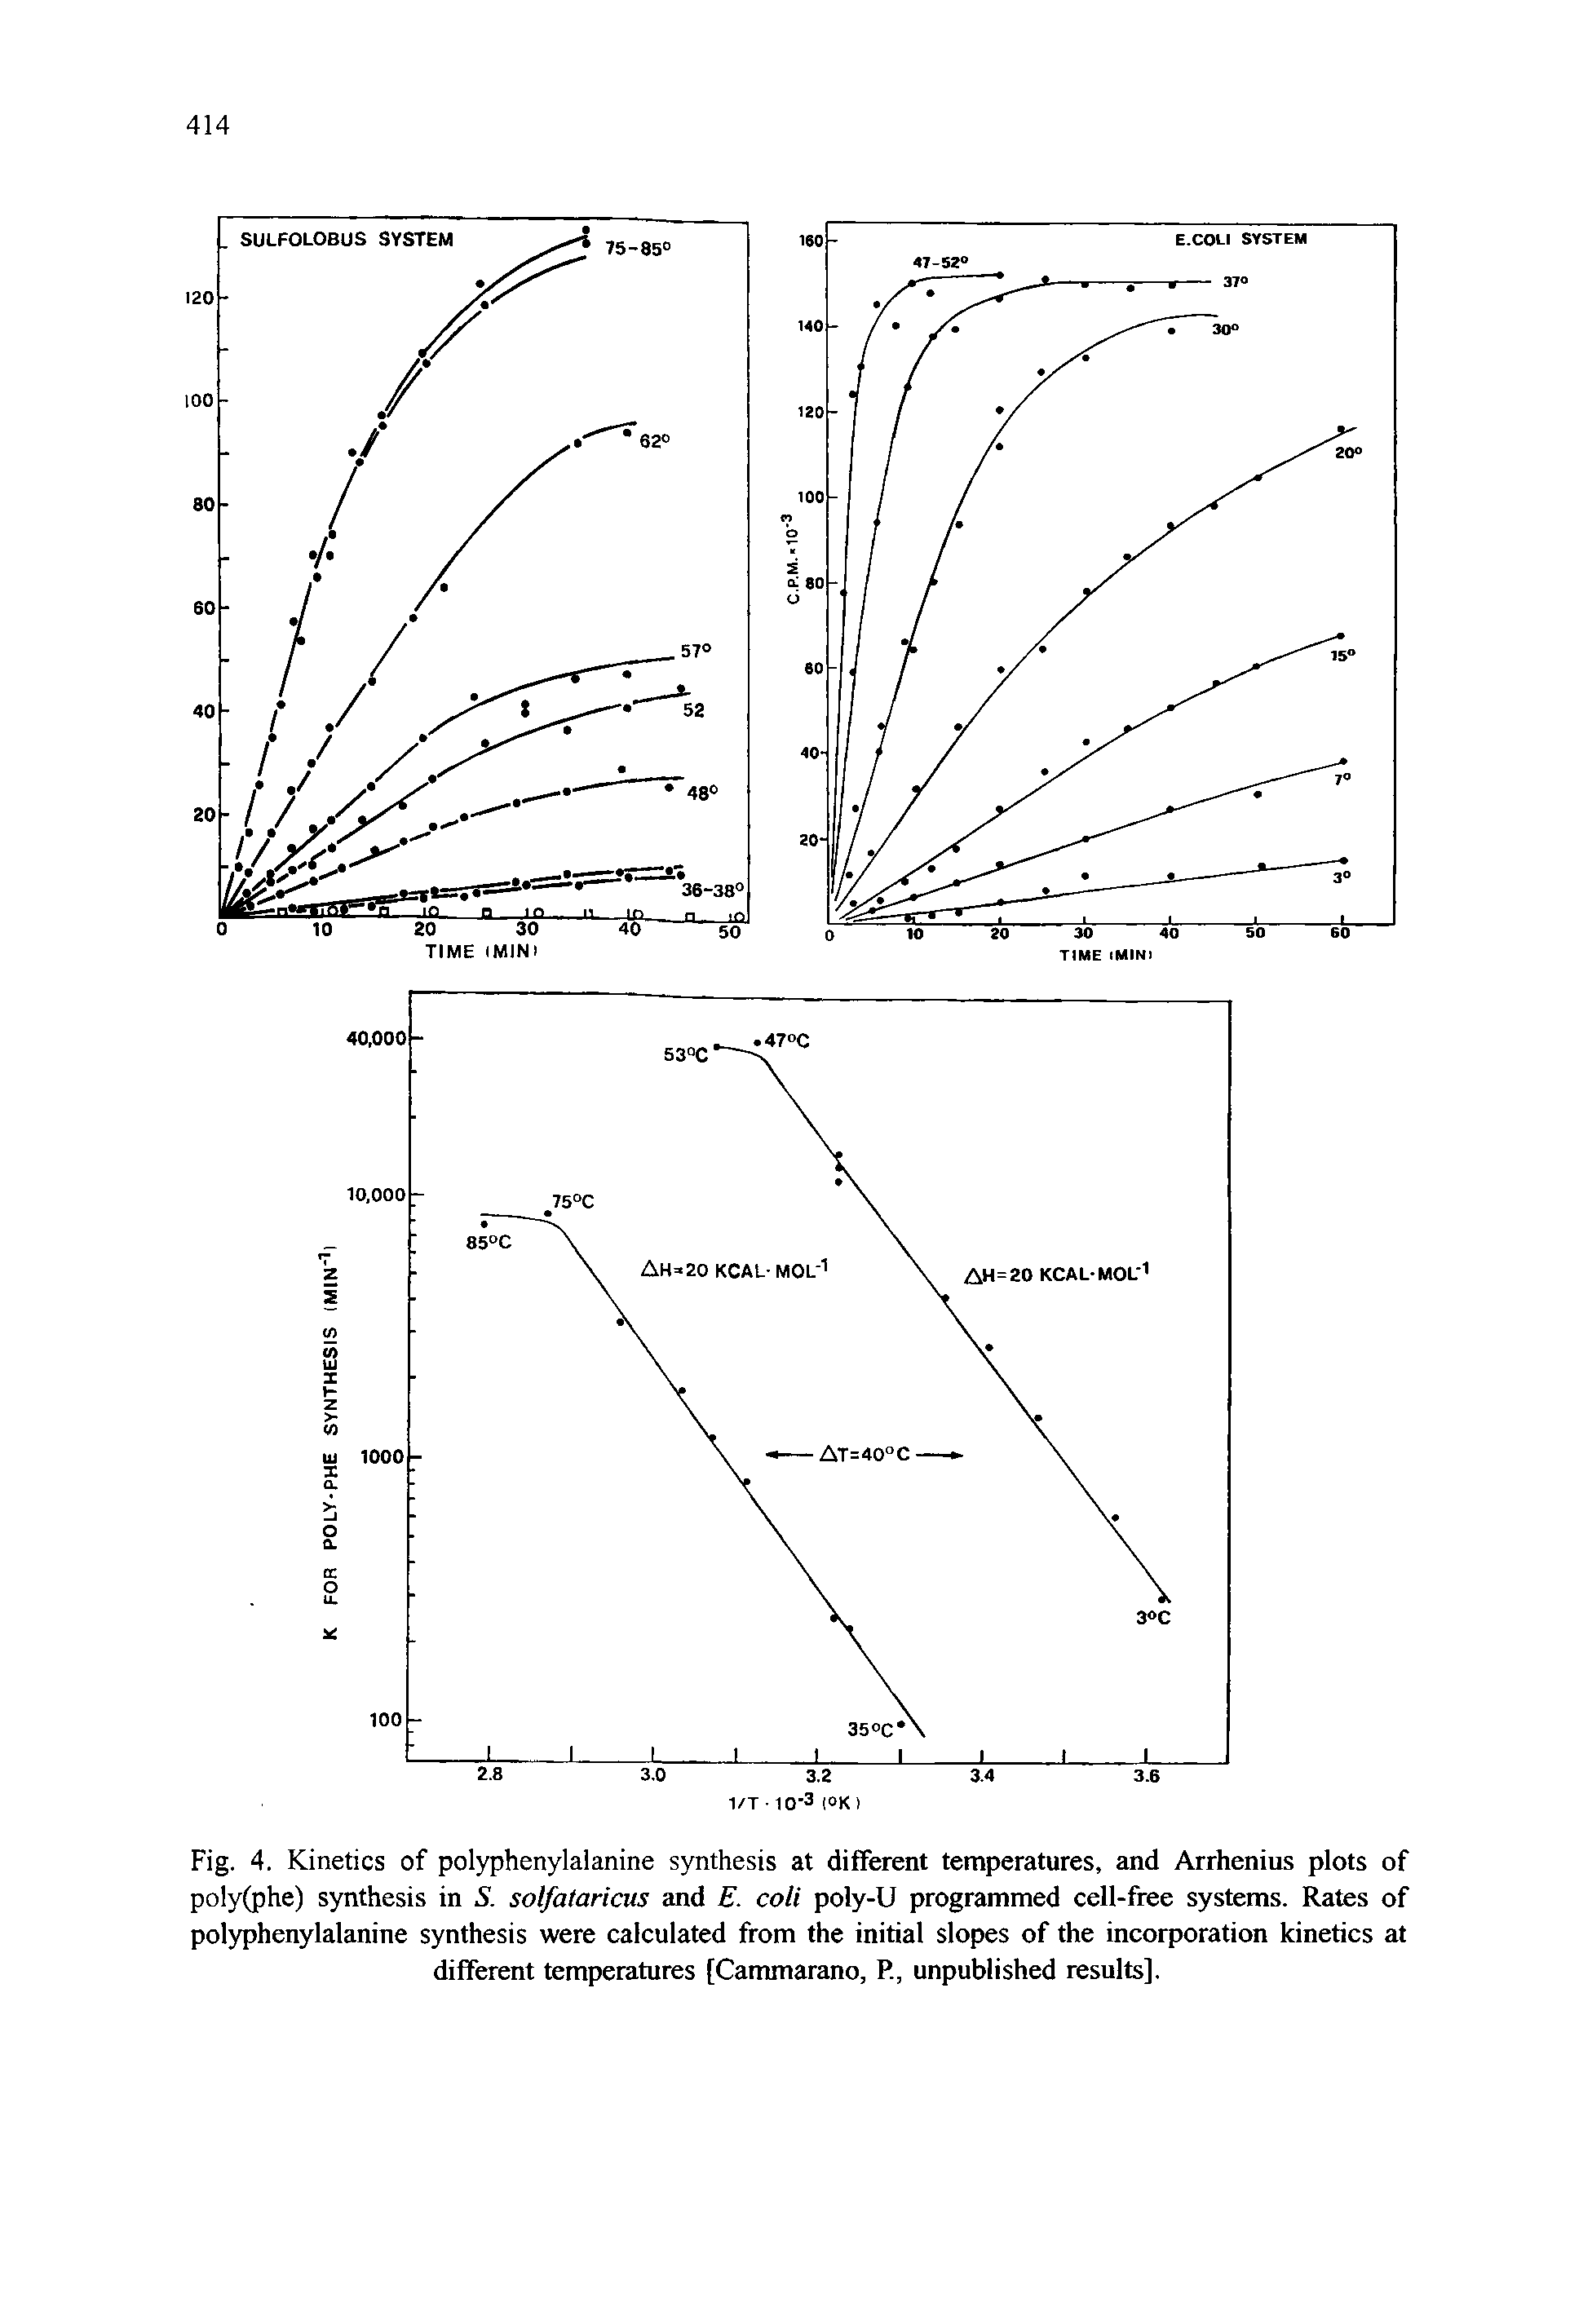 Fig. 4. Kinetics of polyphenylalanine synthesis at different temperatures, and Arrhenius plots of poly(phe) synthesis in S. solfataricus and E. coli poly-U programmed cell-free systems. Rates of polyphenylalanine synthesis were calculated from the initial slopes of the incorporation kinetics at different temperatures [Cammarano, P, unpublished results].